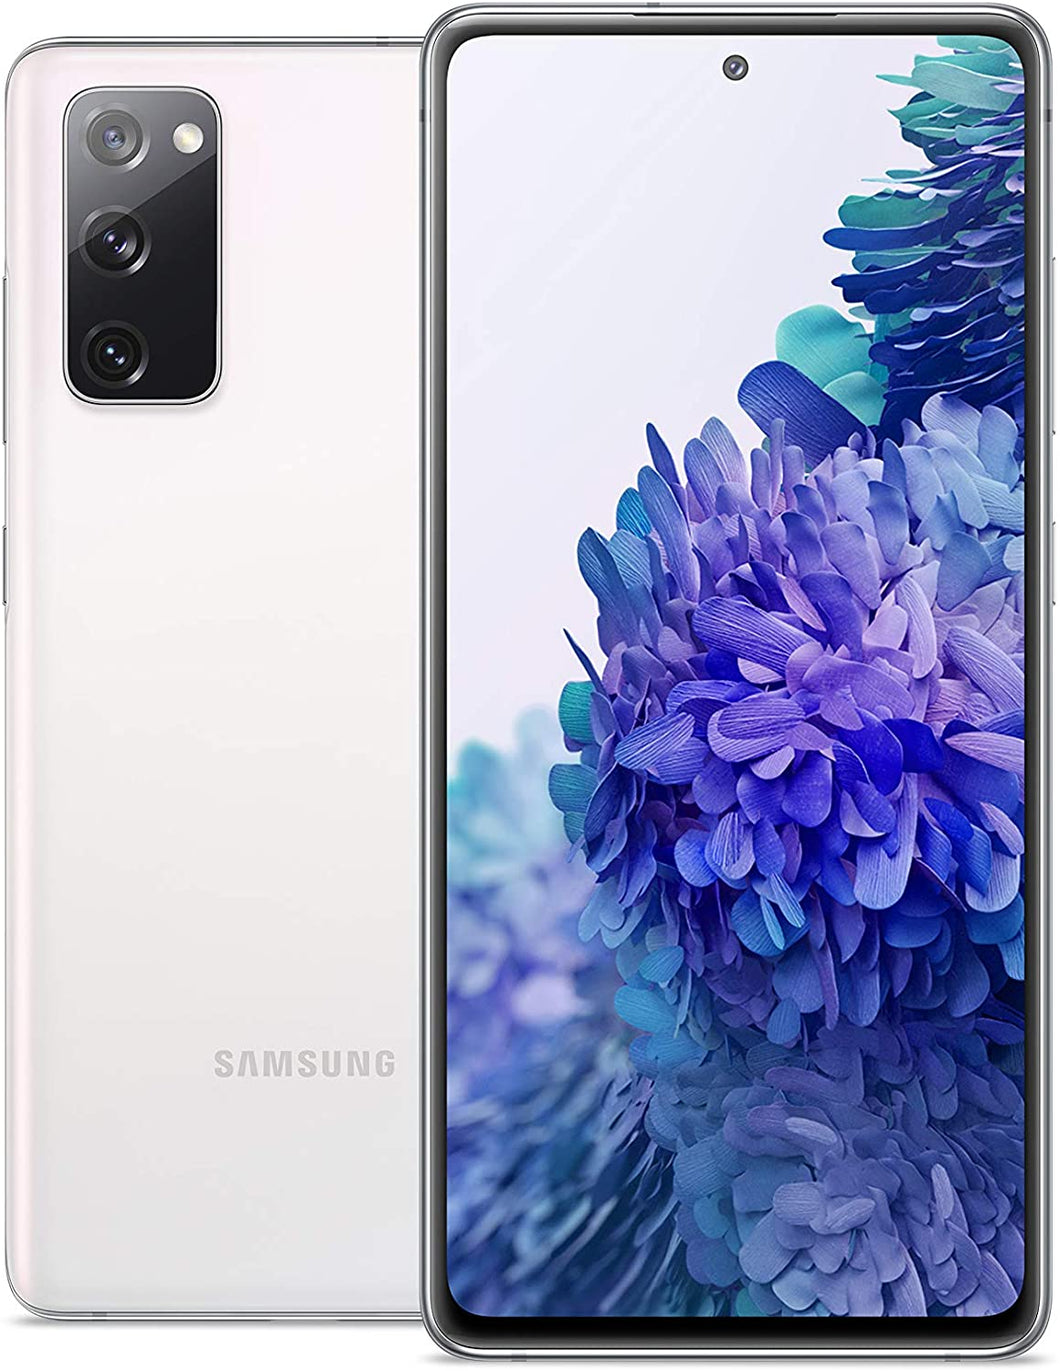 Samsung Galaxy S20 FE 5G | Factory Unlocked Android Cell Phone | 128 GB | US Version Smartphone | Pro-Grade Camera, 30X Space Zoom, Night Mode | Cloud White